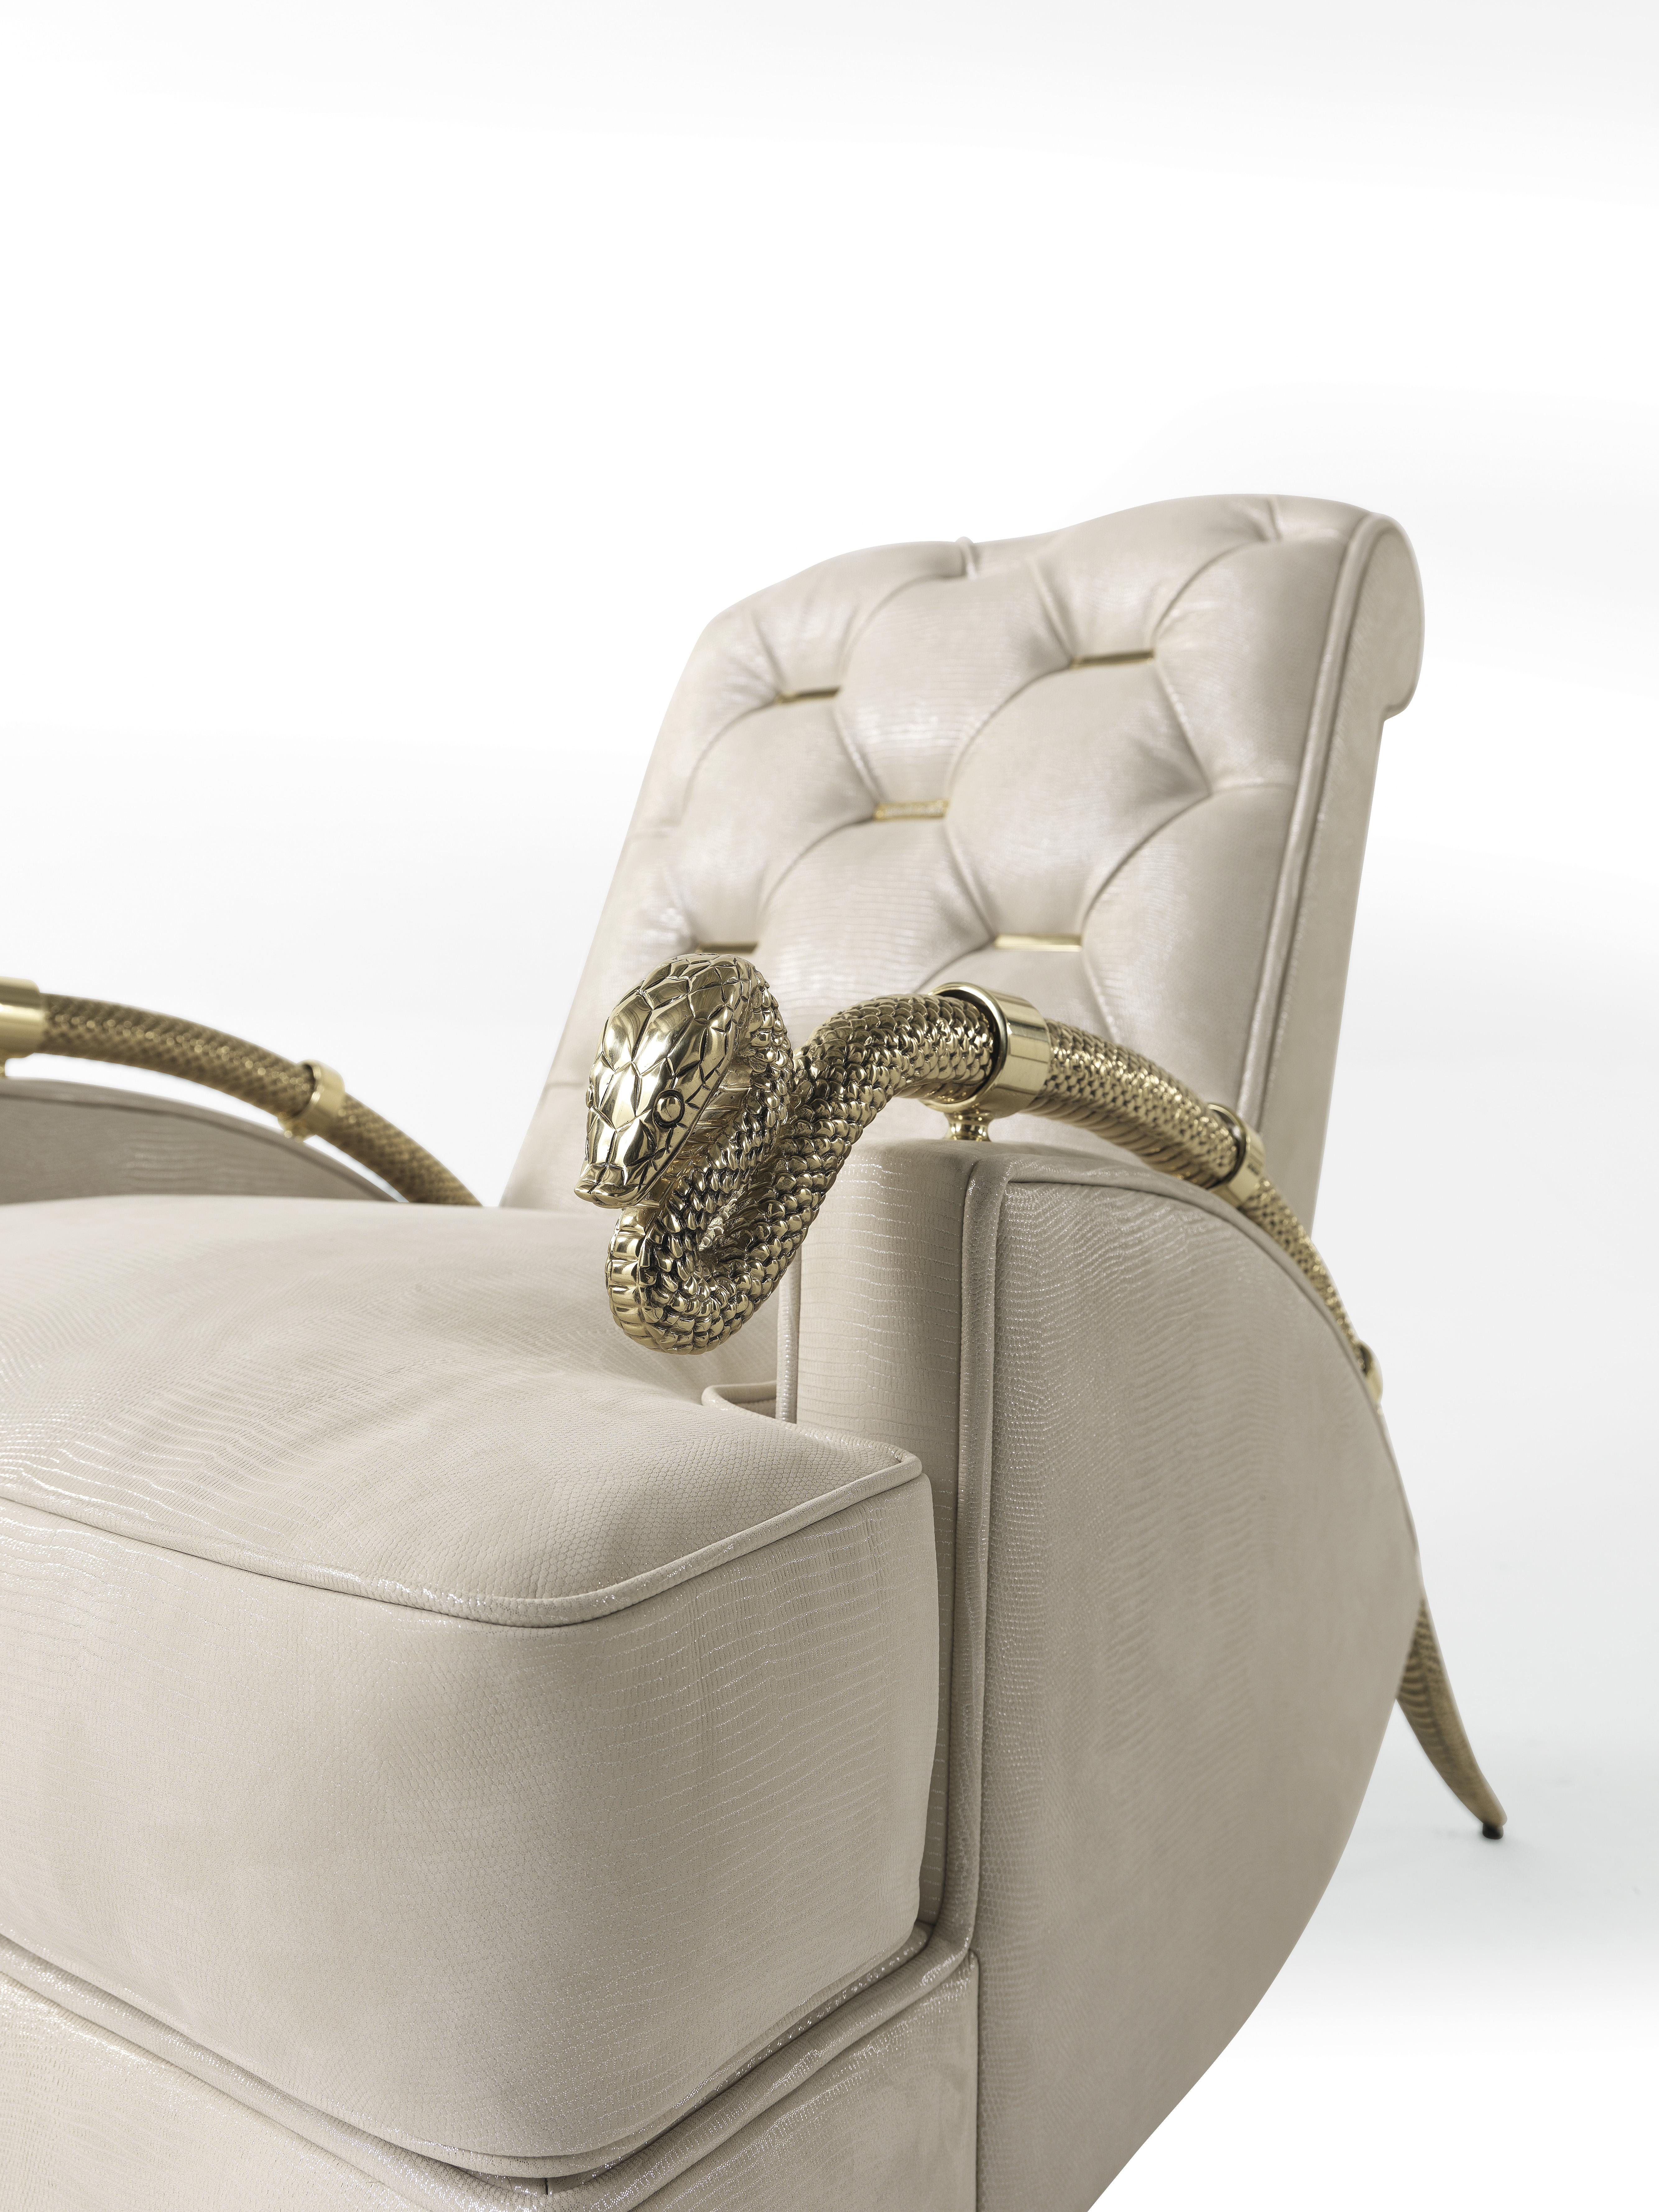 Italian 21st Century Snake Armchair in Leather by Roberto Cavalli Home Interiors For Sale